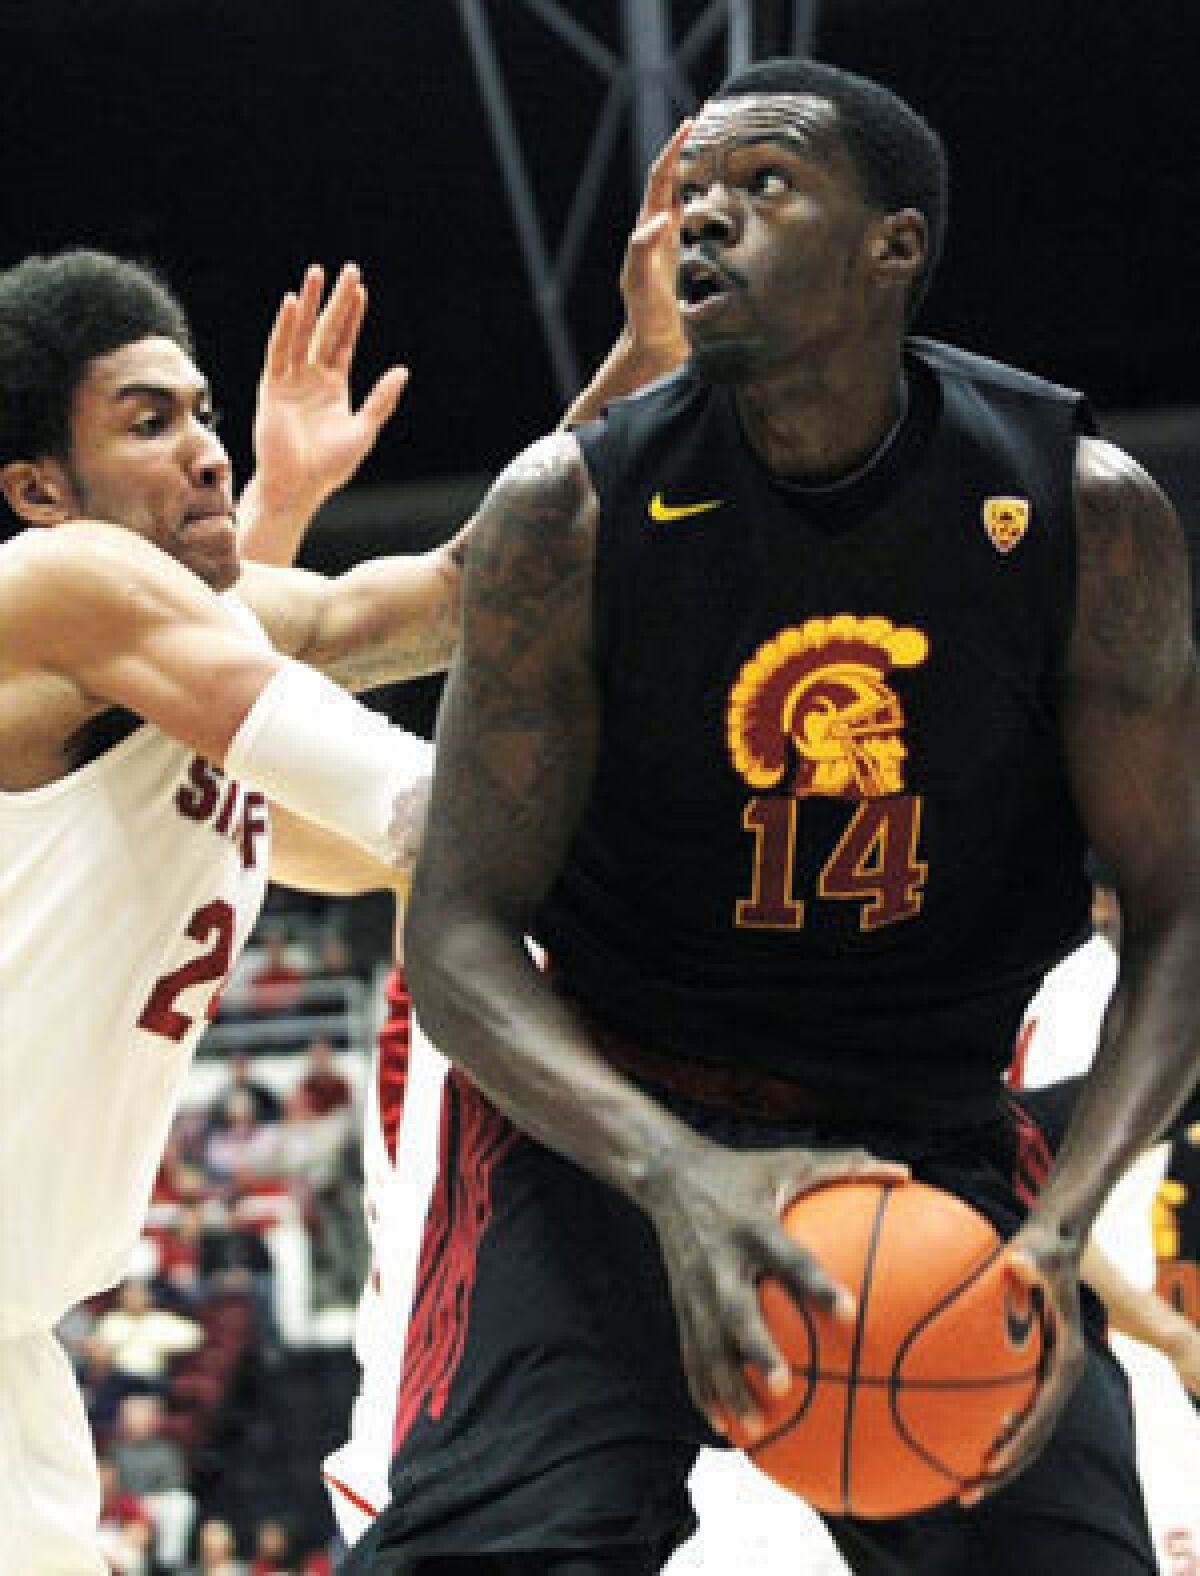 Dewayne Dedmon, right, has been suspended indefinitely from the USC men's basketball team.